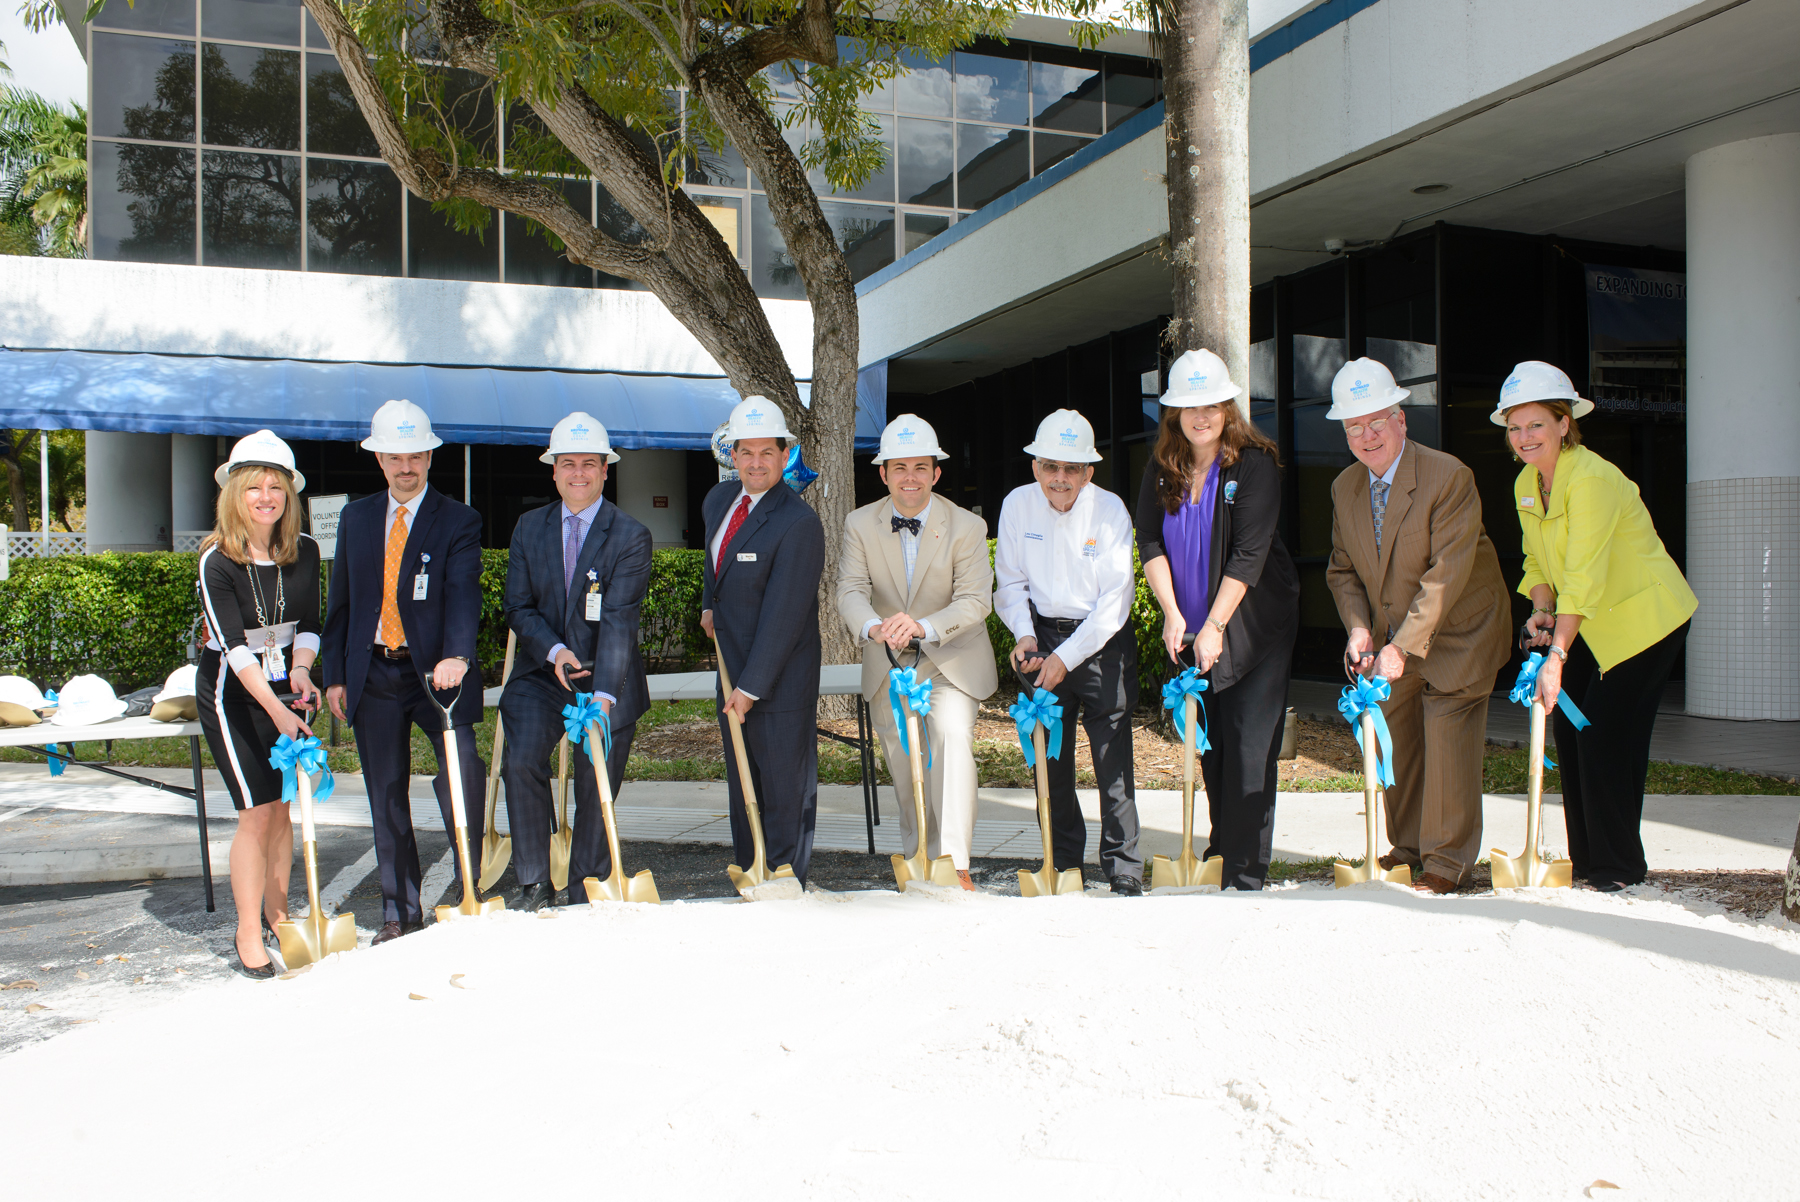 Groundbreaking ceremony included: Kim Jutras Graham/Broward Health Coral Springs(BHCS) Chief Operating Officer & Chief Nursing Officer; Ronald Brandenburg/BHCS Chief Financial Officer; Drew Grossman/ BHCS Chief Executive Officer; Parkland Mayor Michael Udine; Coral Springs Vice Mayor Dan Daley; Coral Springs Commissioner Lou Cimaglia; Parkland Commissioner Christine Hunschofsky; Coral Springs Mayor Skip Campbell; Commissioner Joy Carter .